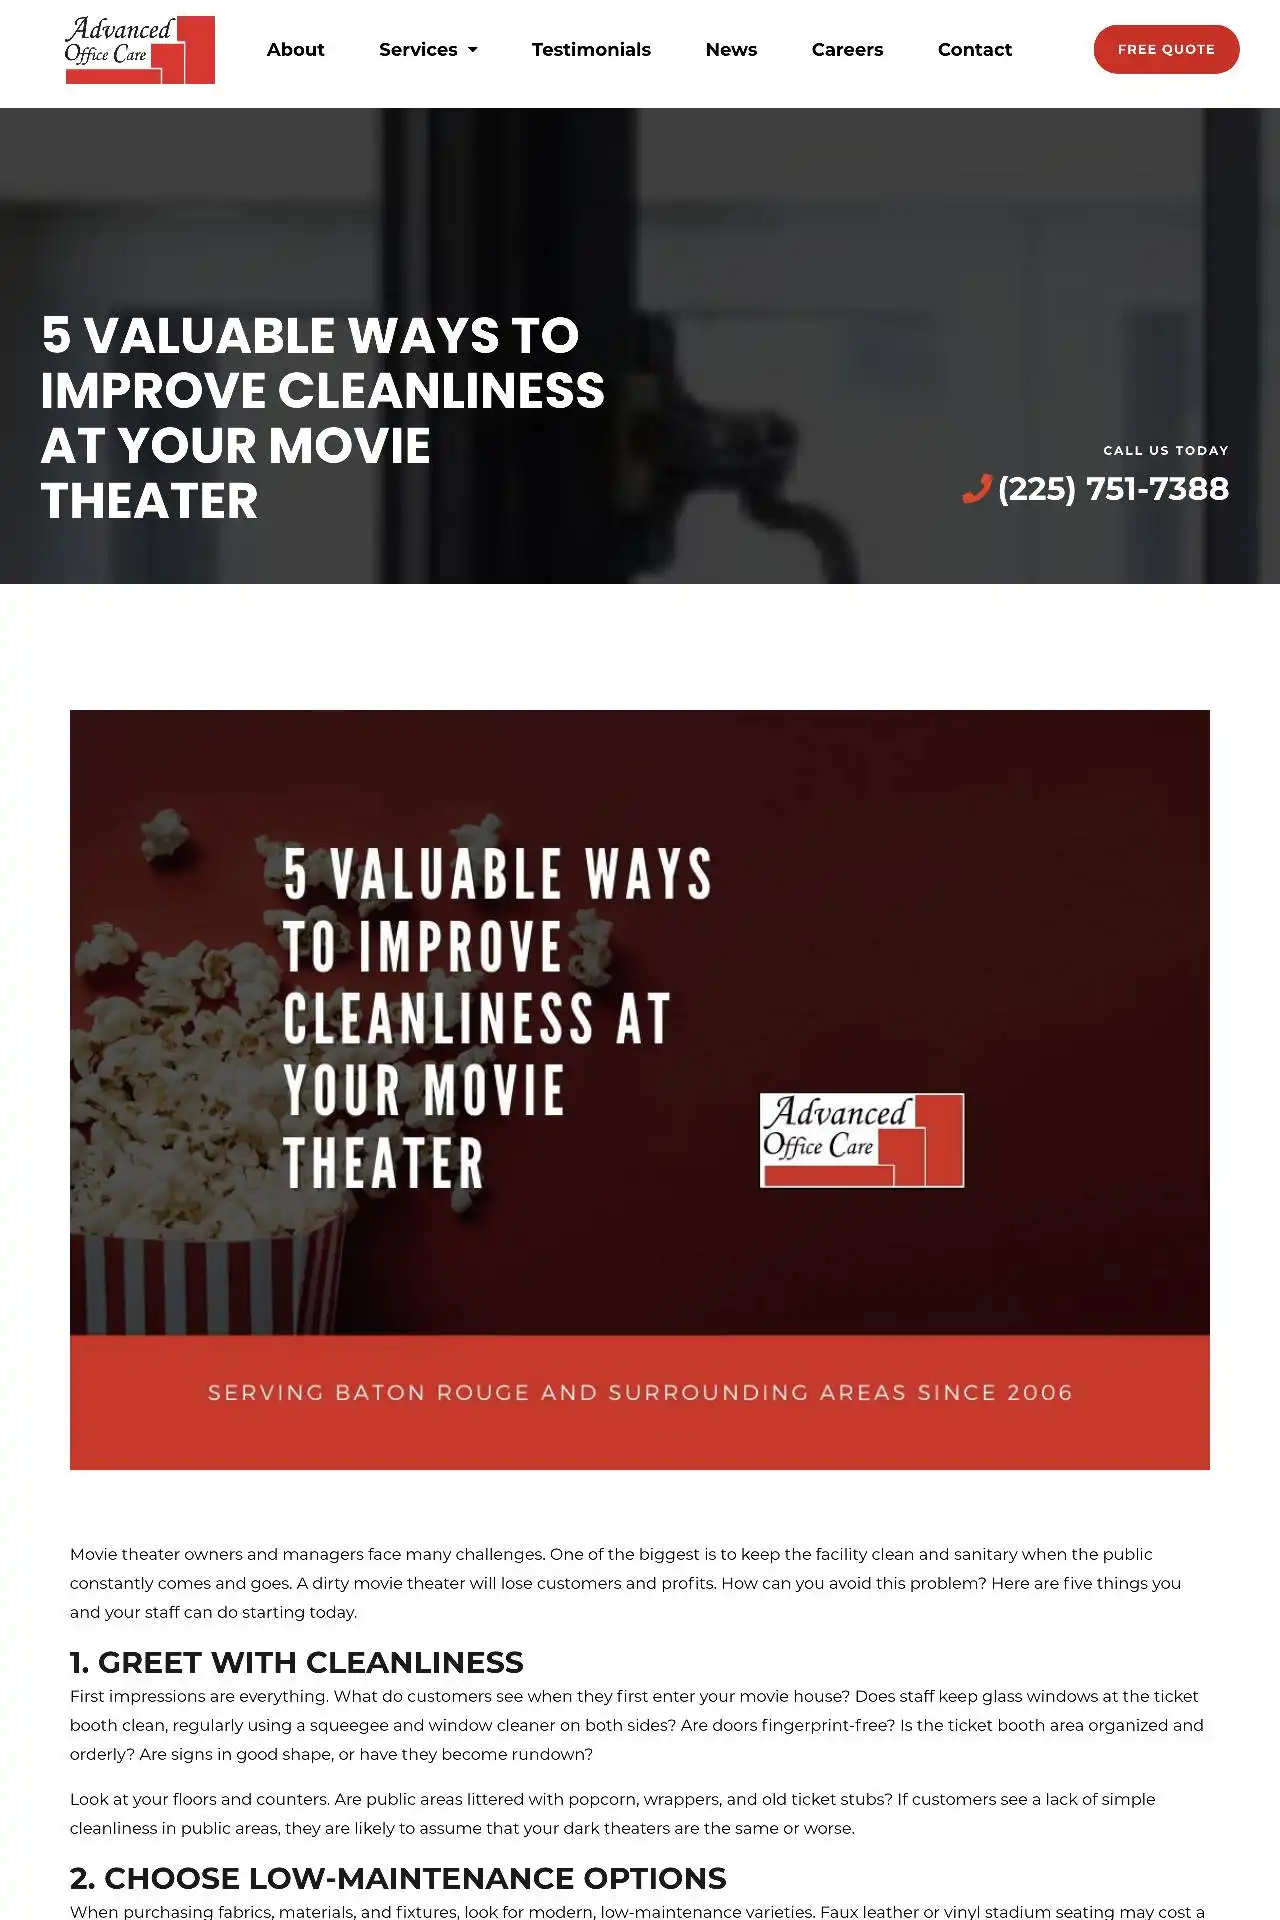 baton rouge cleaning company website design development https aocla.com cleaning 5 valuable ways to improve cleanliness at your movie theater